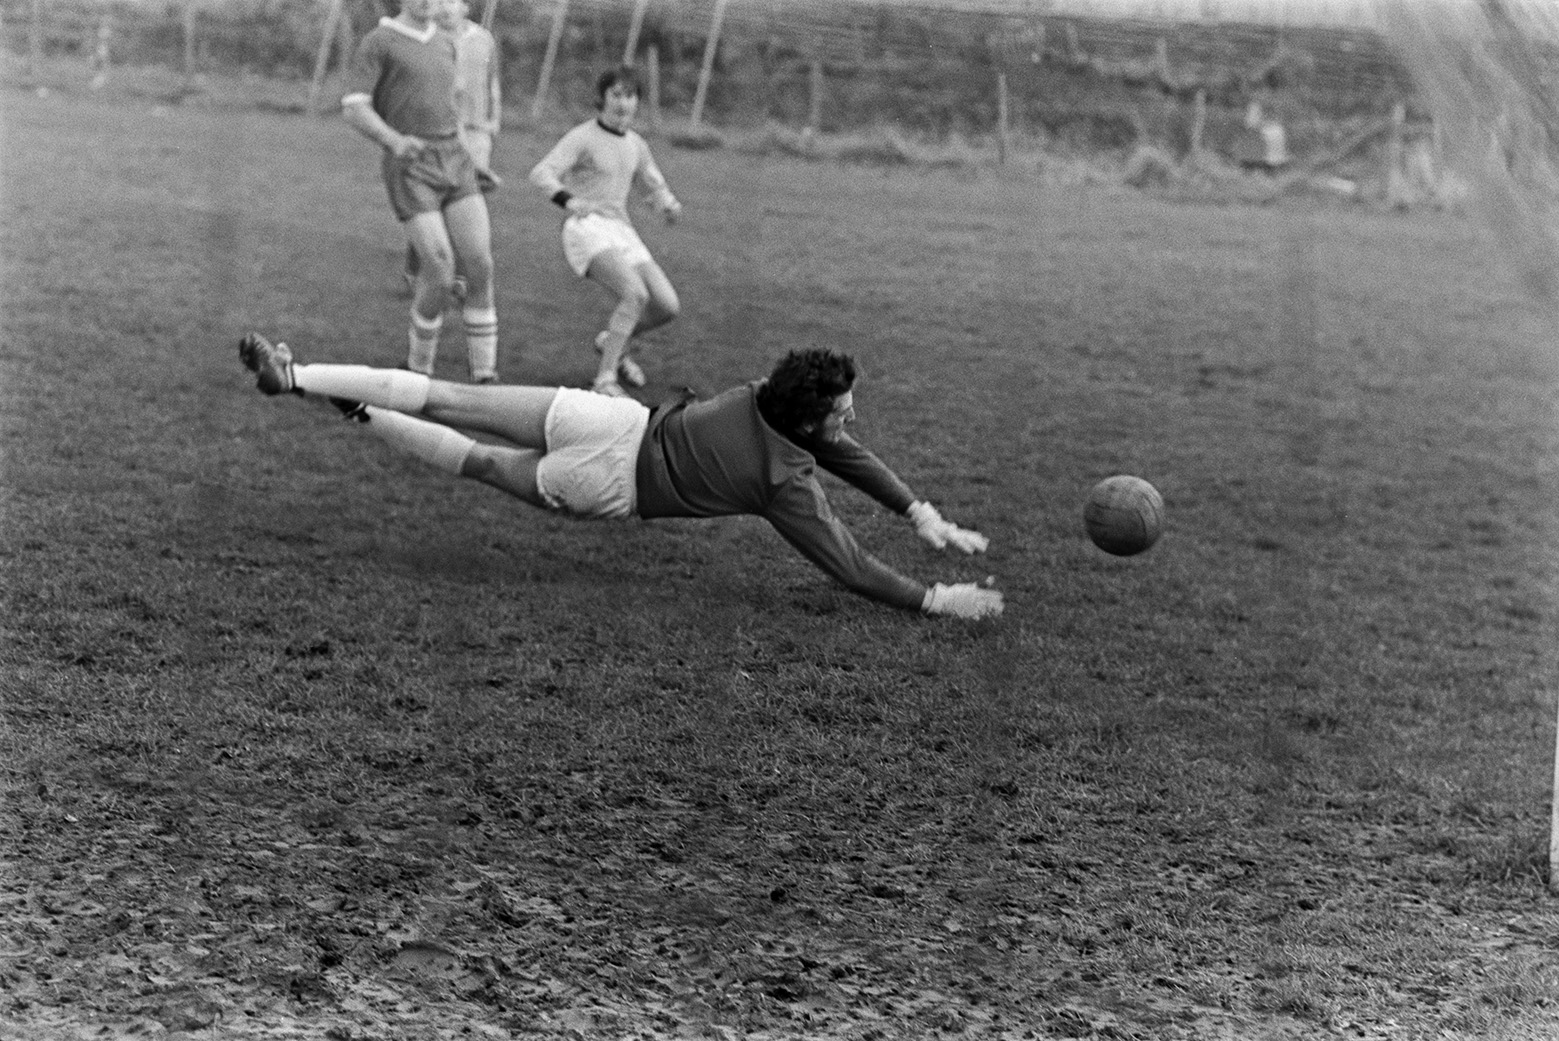 Football match between Merton and Dolton at Merton. The goal keeper is diving for the football and saving a goal.